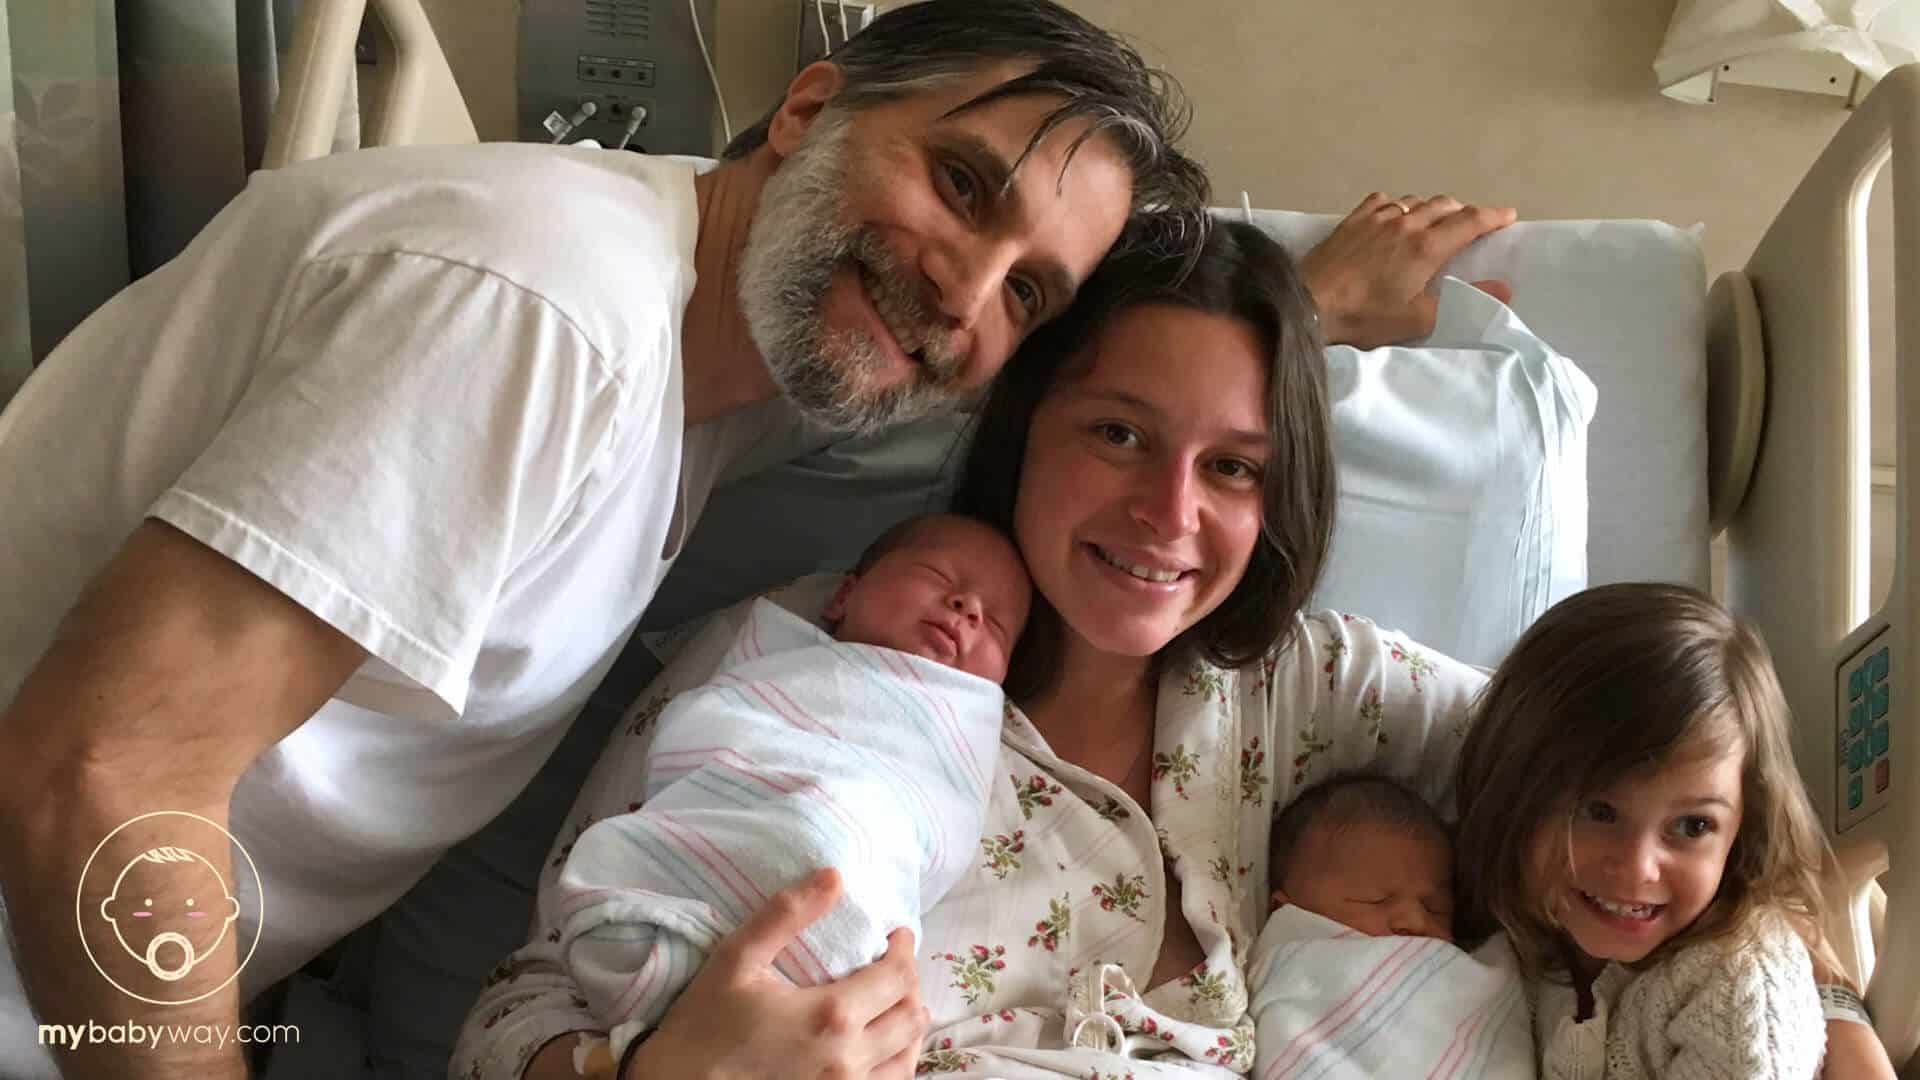 Couple poses with newborn twins at hospital.